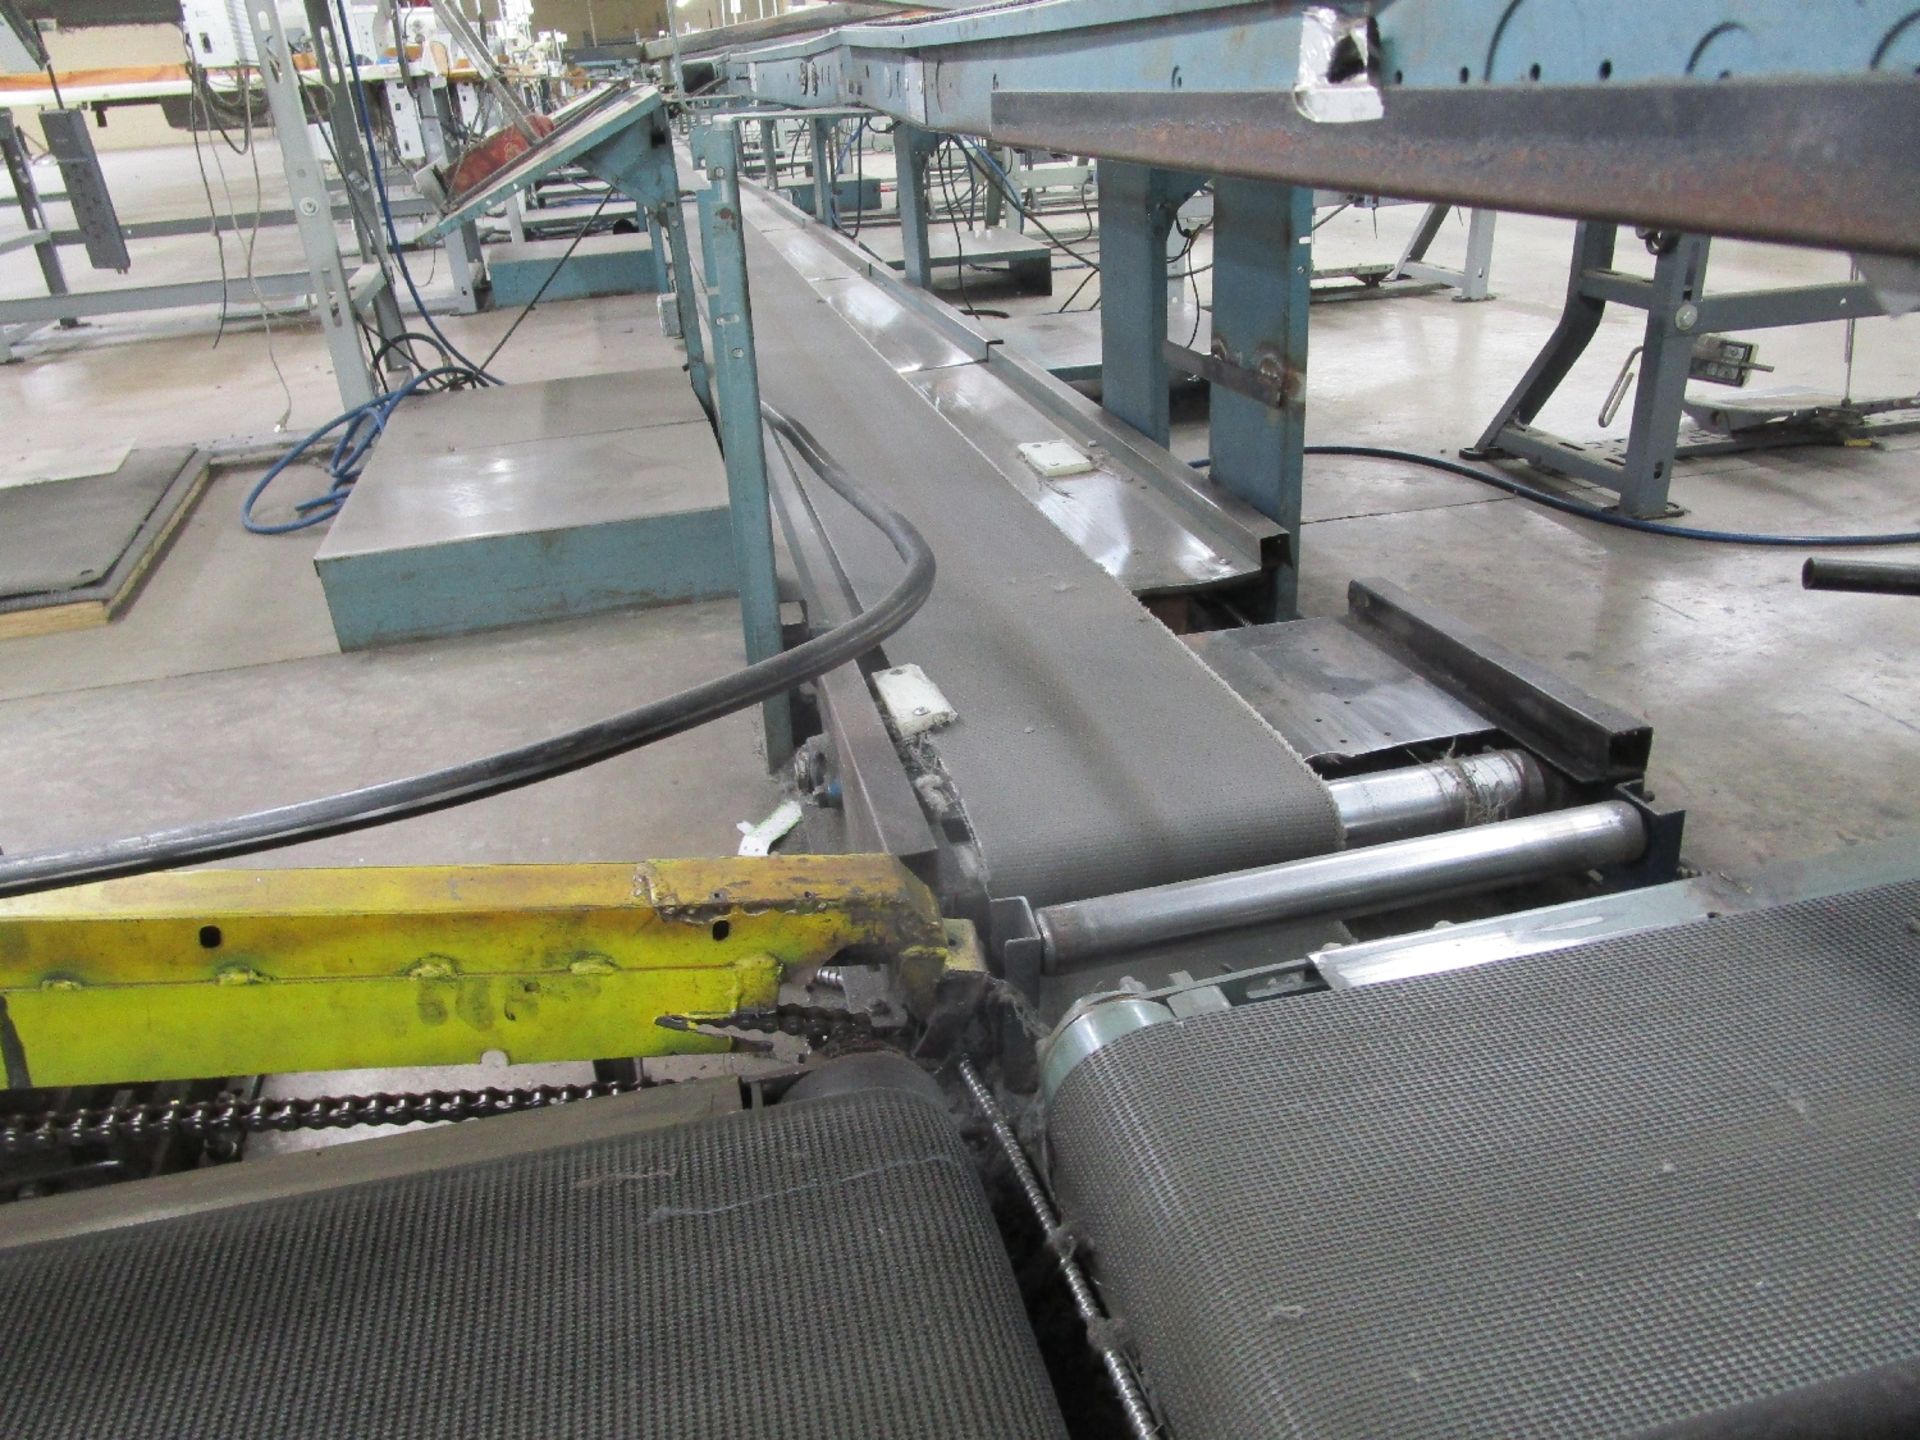 Hytrol Powered Conveyor System Throughout Sewing Department - Image 4 of 7